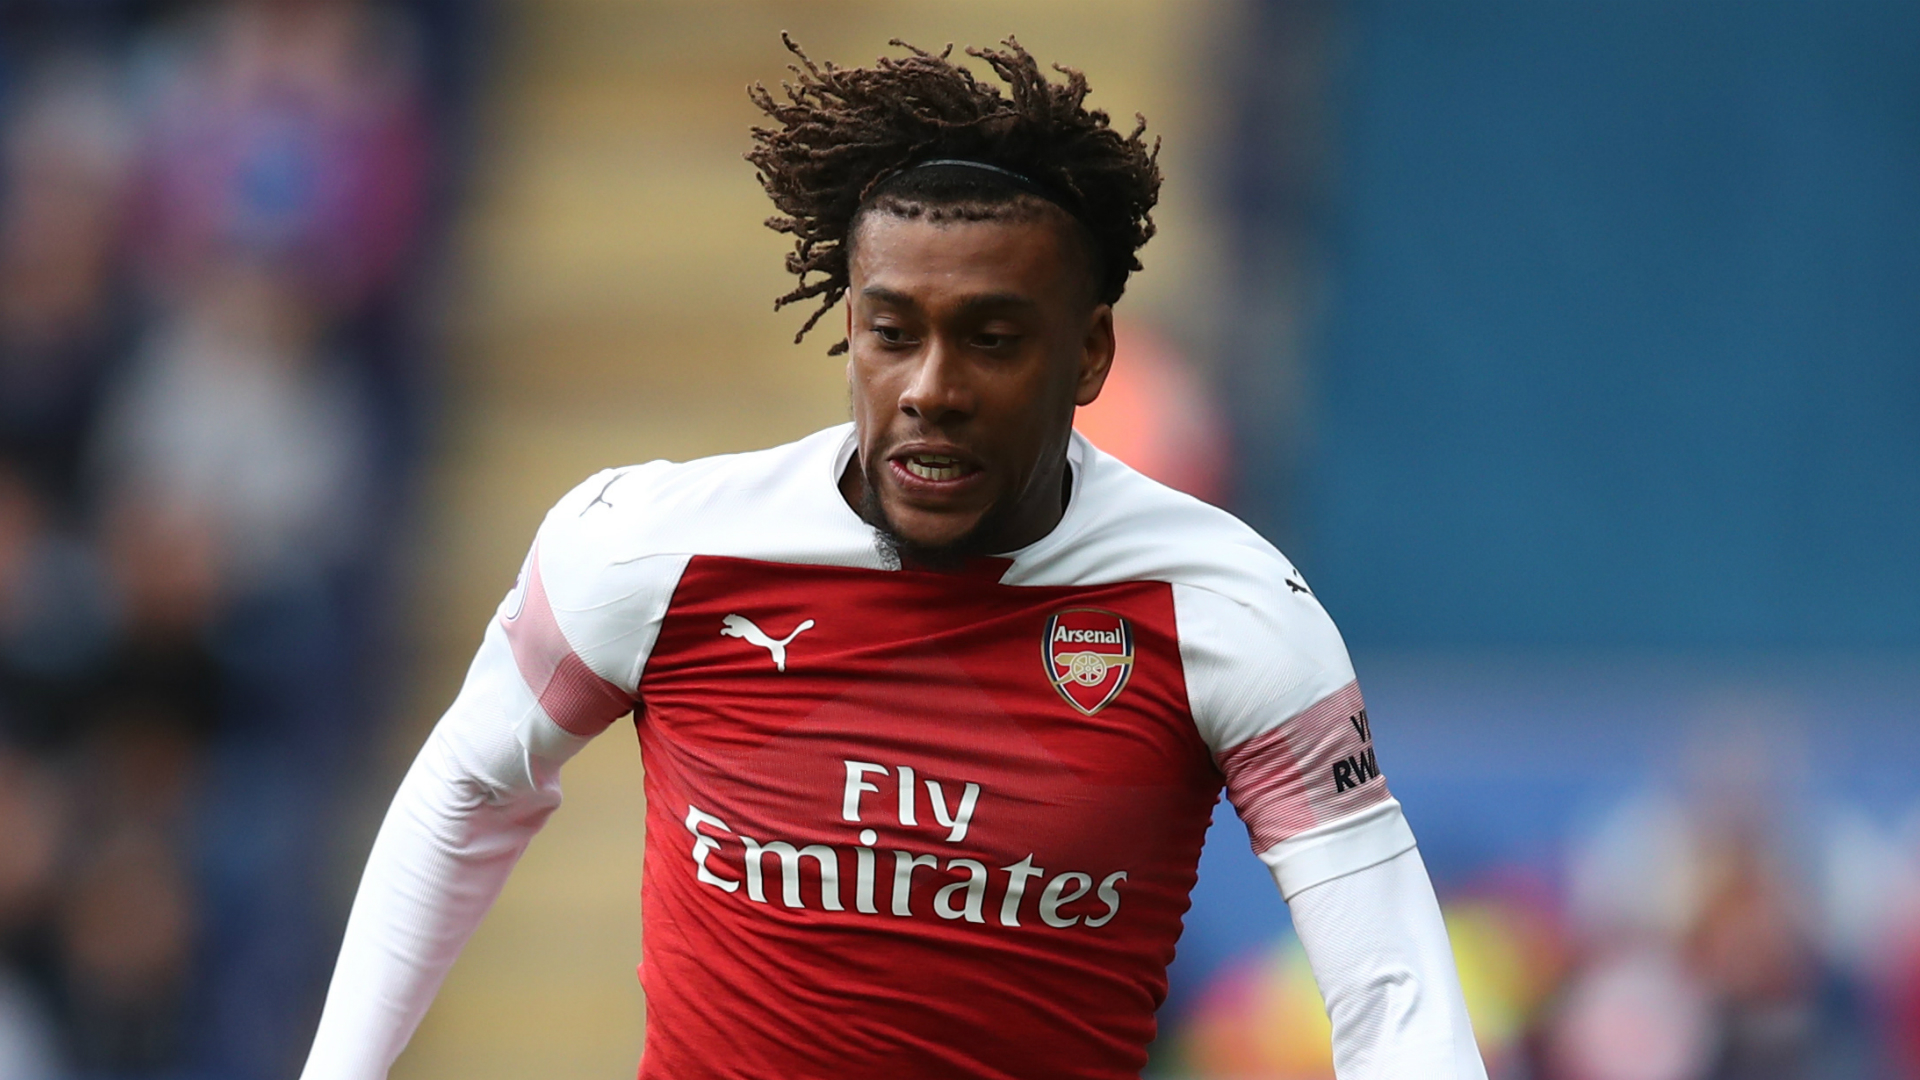 Arsenal attacker Alex Iwobi has responded to reports that claimed he could consider his future over a potential move for Wilfried Zaha.